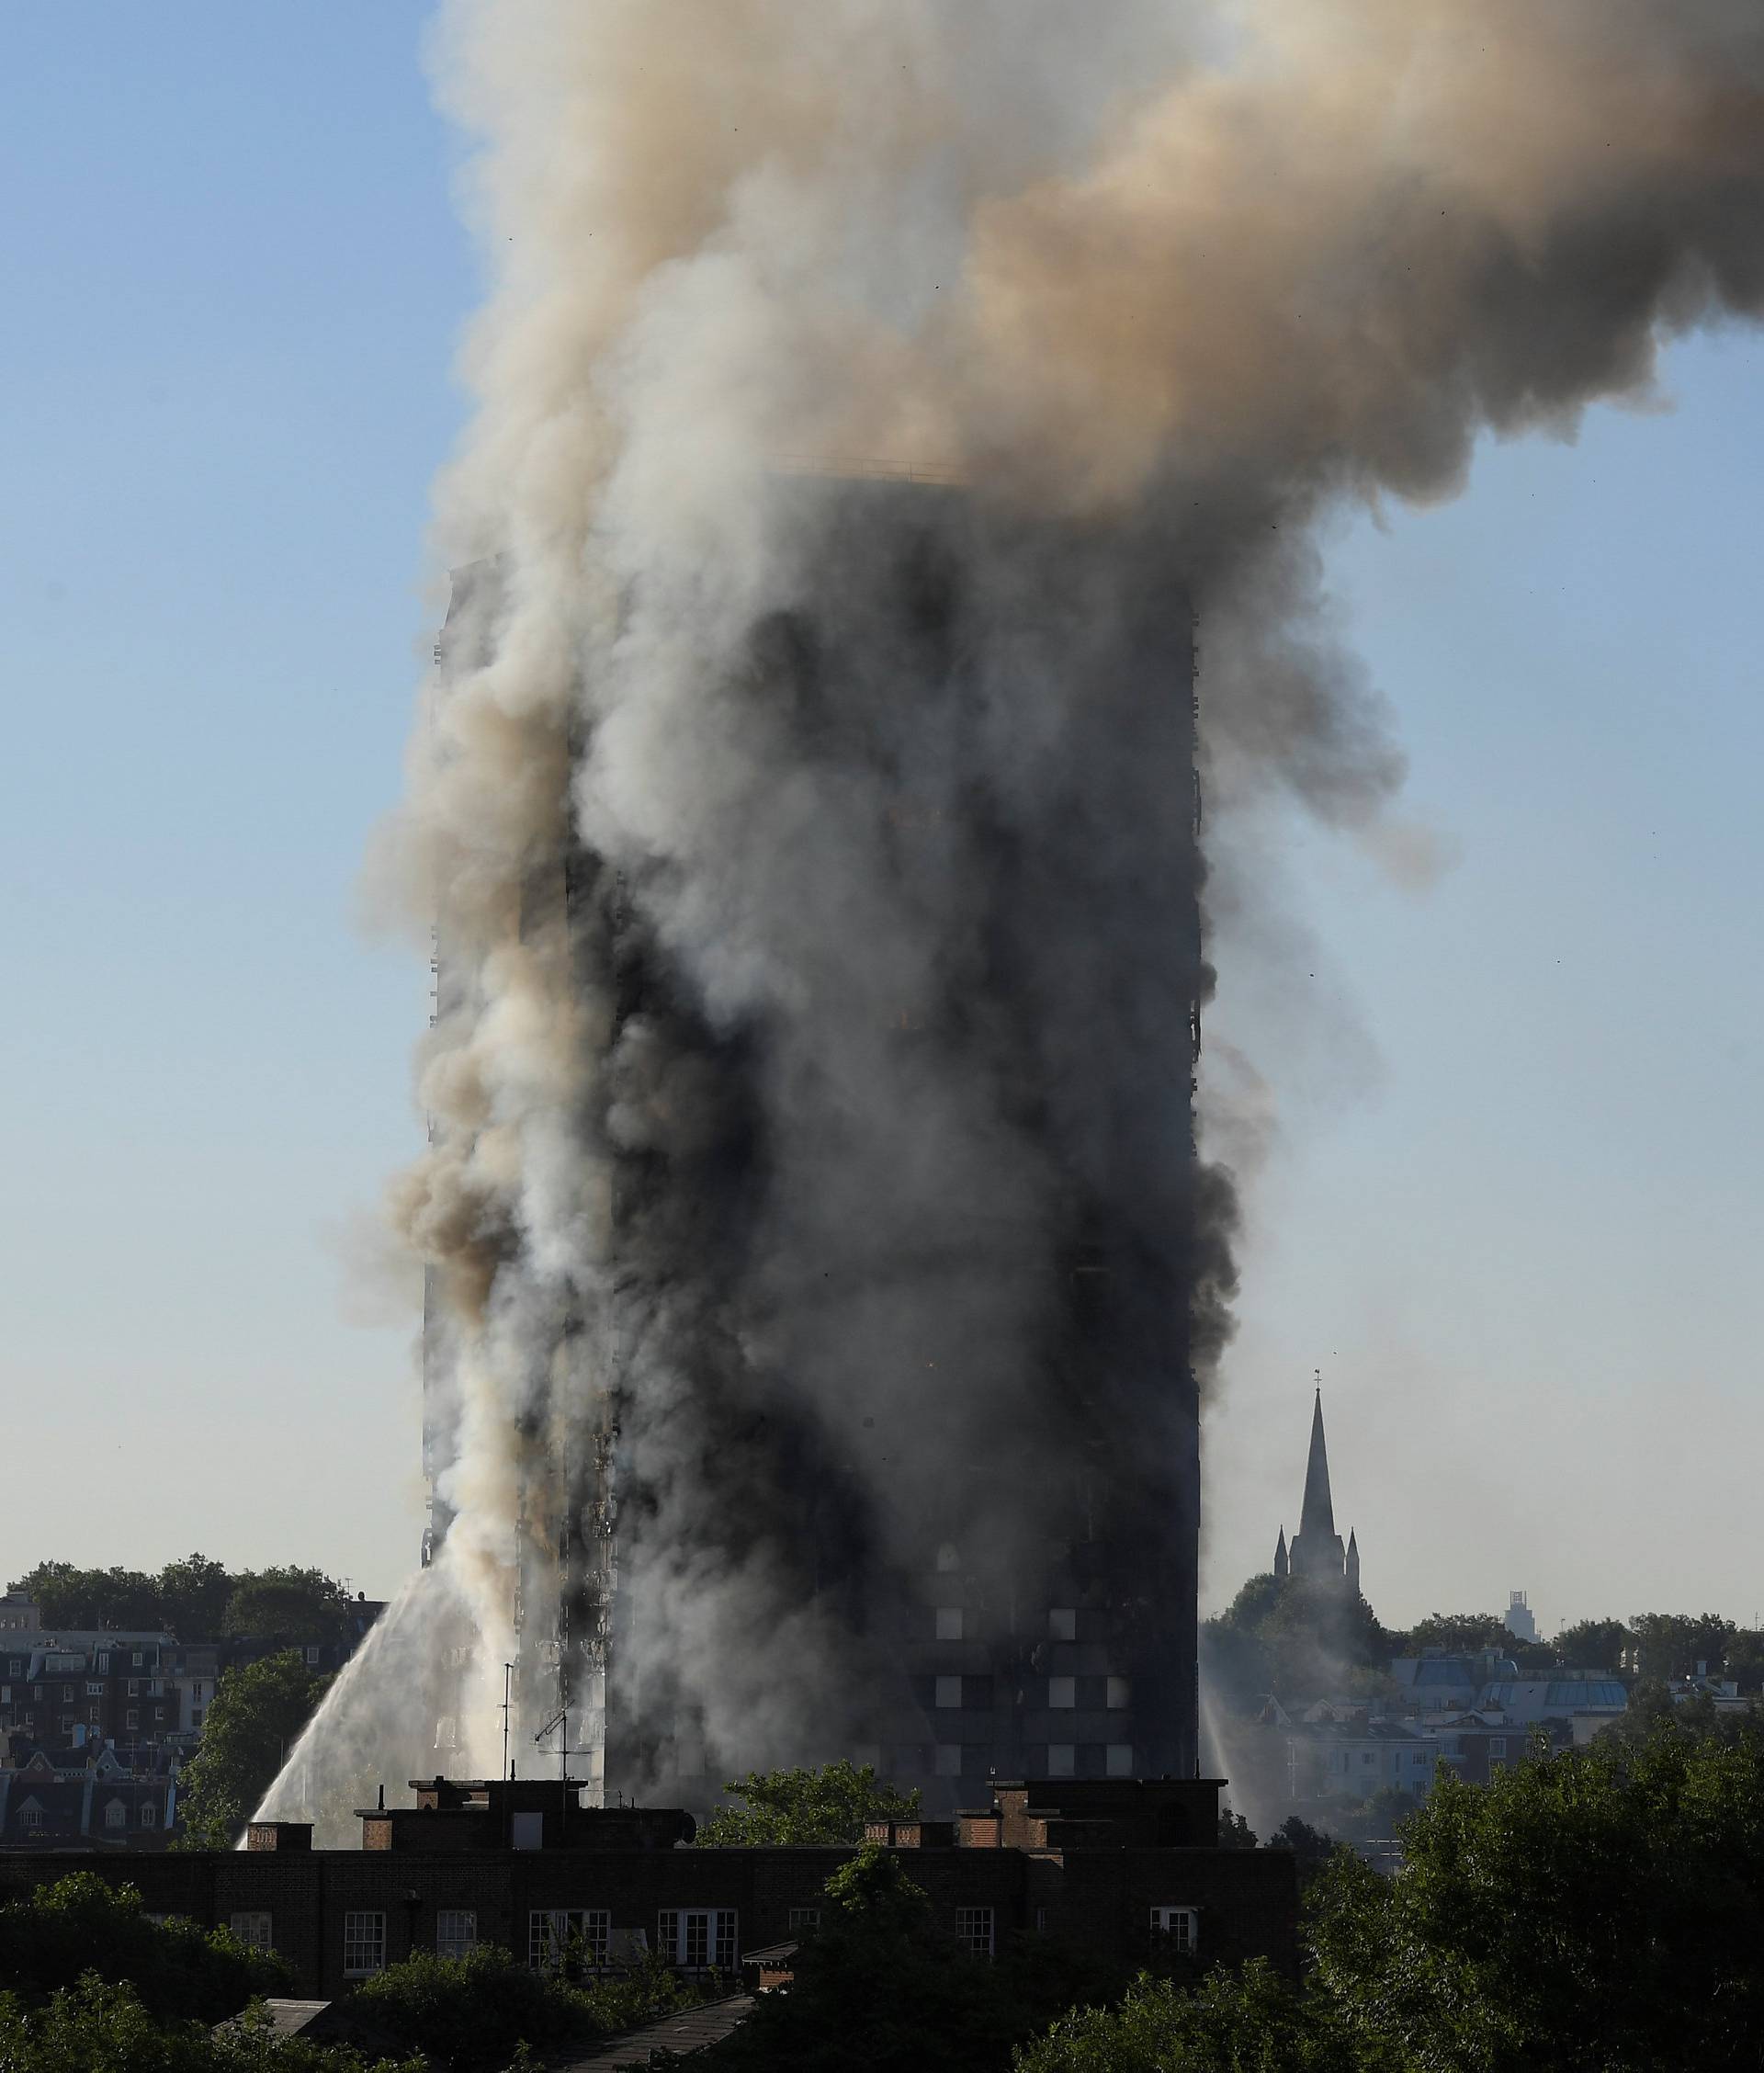 Smoke billows as firefighters deal with a serious fire in a tower block at Latimer Road in West London